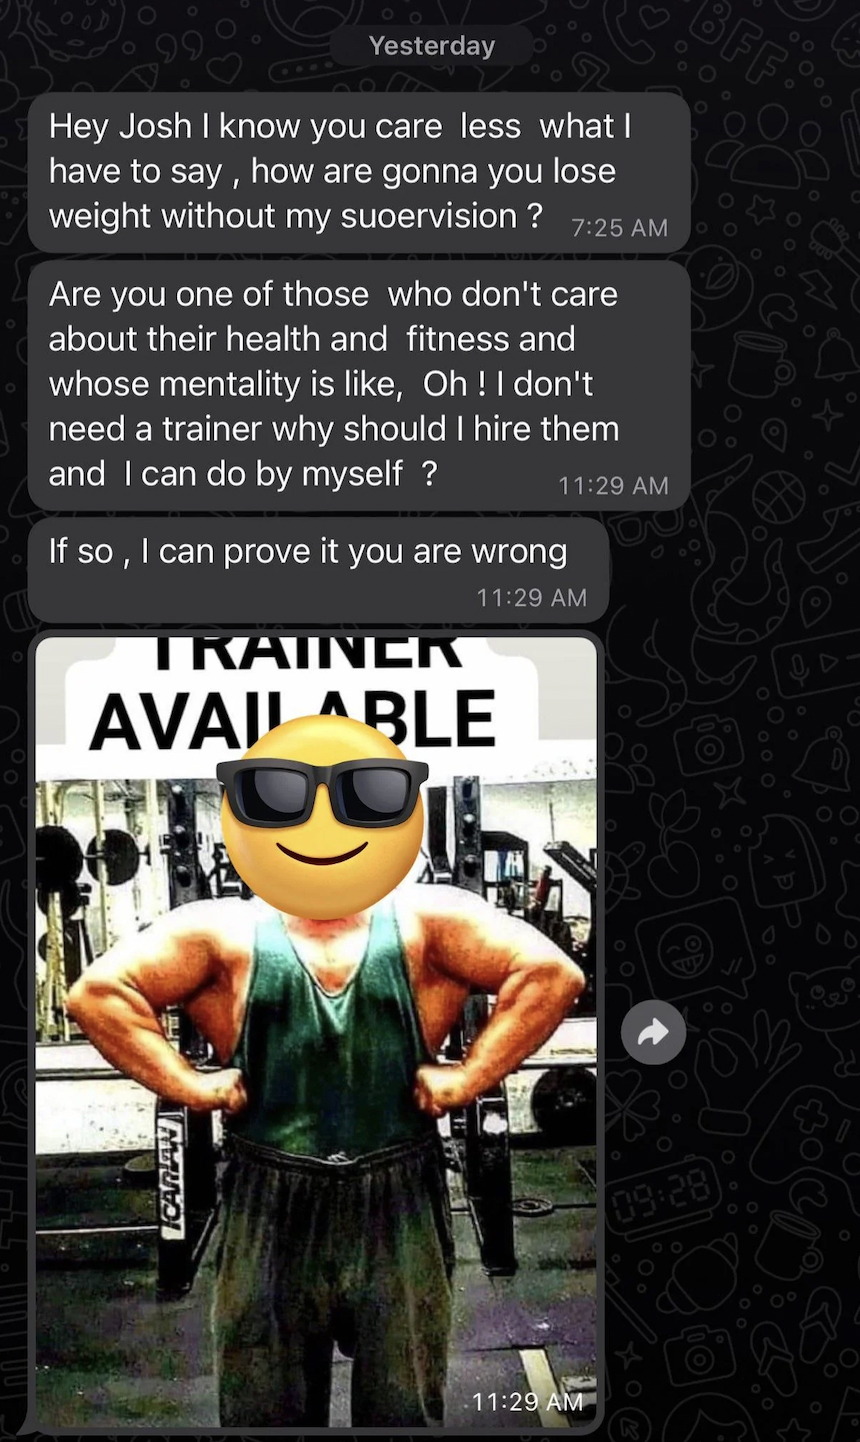 screenshot - Icarian Yesterday Hey Josh I know you care less what I have to say, how are gonna you lose weight without my supervision? Are you one of those who don't care about their health and fitness and whose mentality is , Oh! I don't need a trainer w